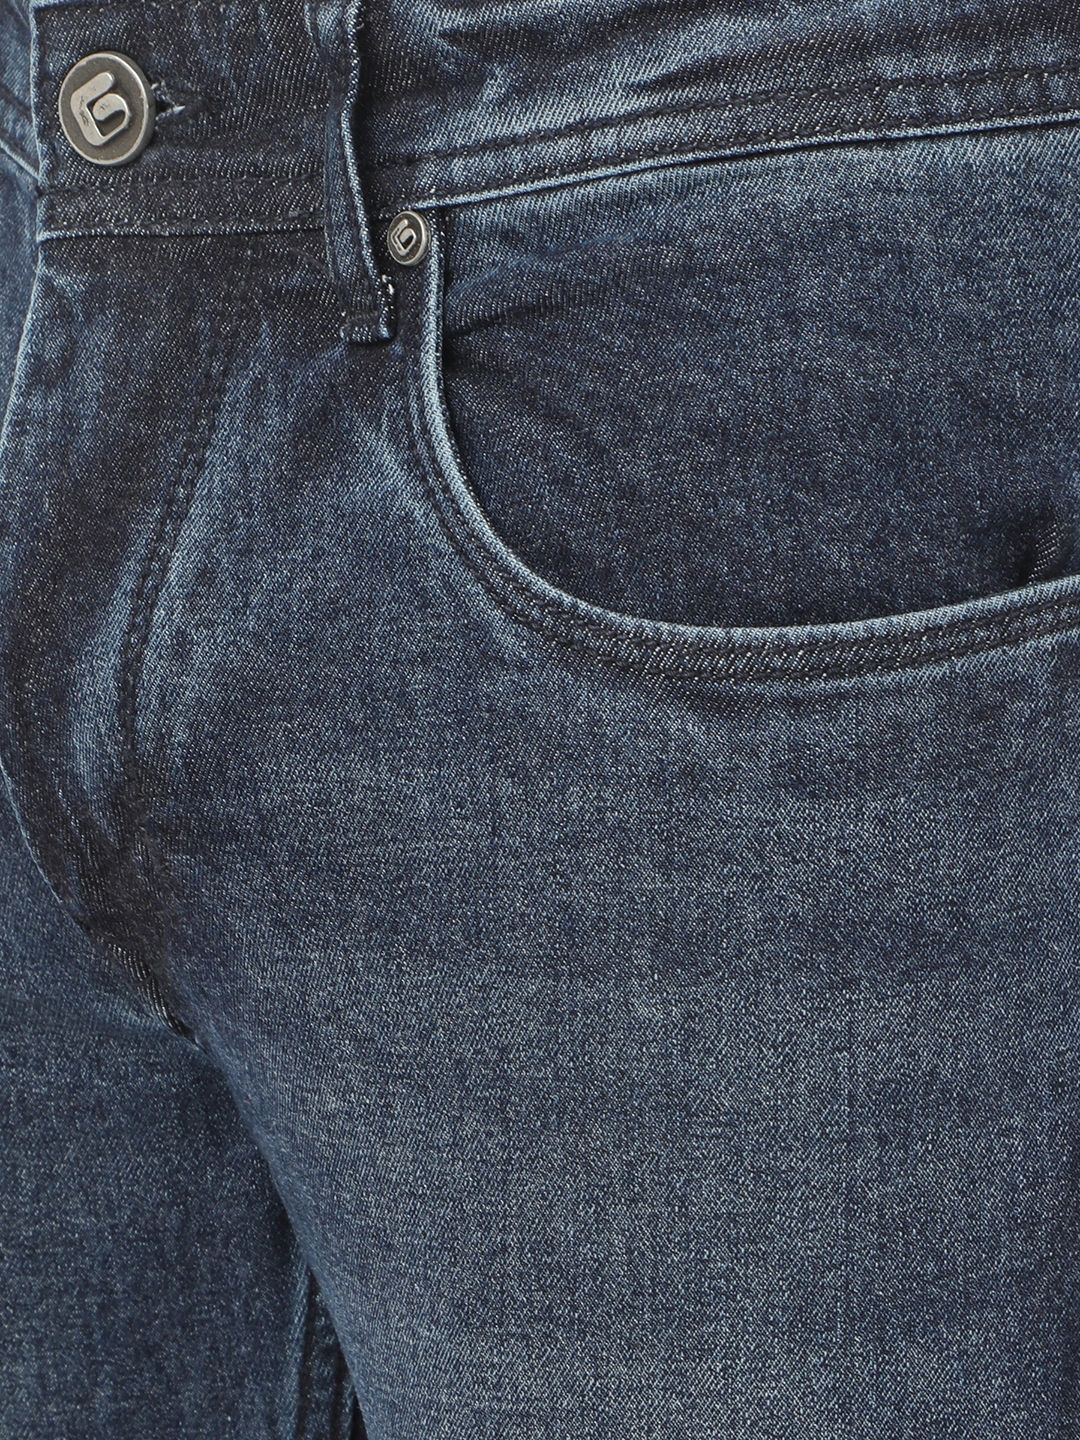 Greenfibre | Denim Blue Washed Narrow Fit Jeans | Greenfibre 4